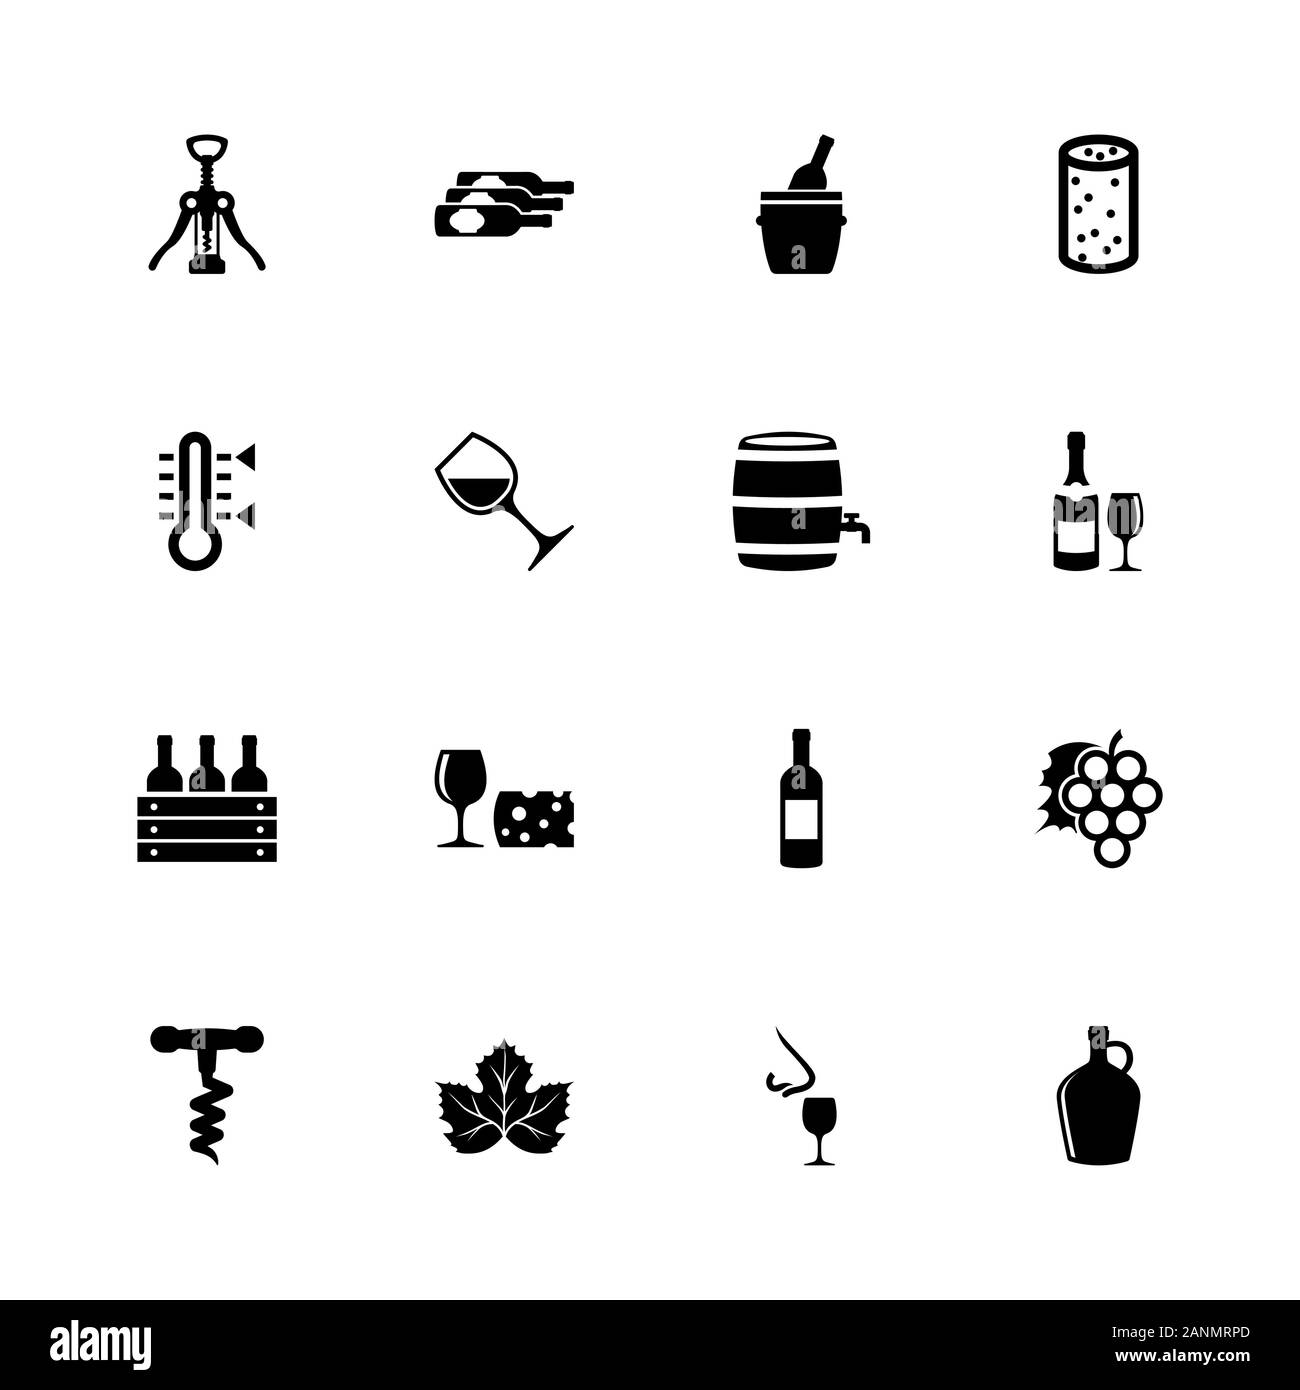 Wine icons - Expand to any size - Change to any colour. Flat Vector Icons - Black Illustration on White Background. Stock Vector